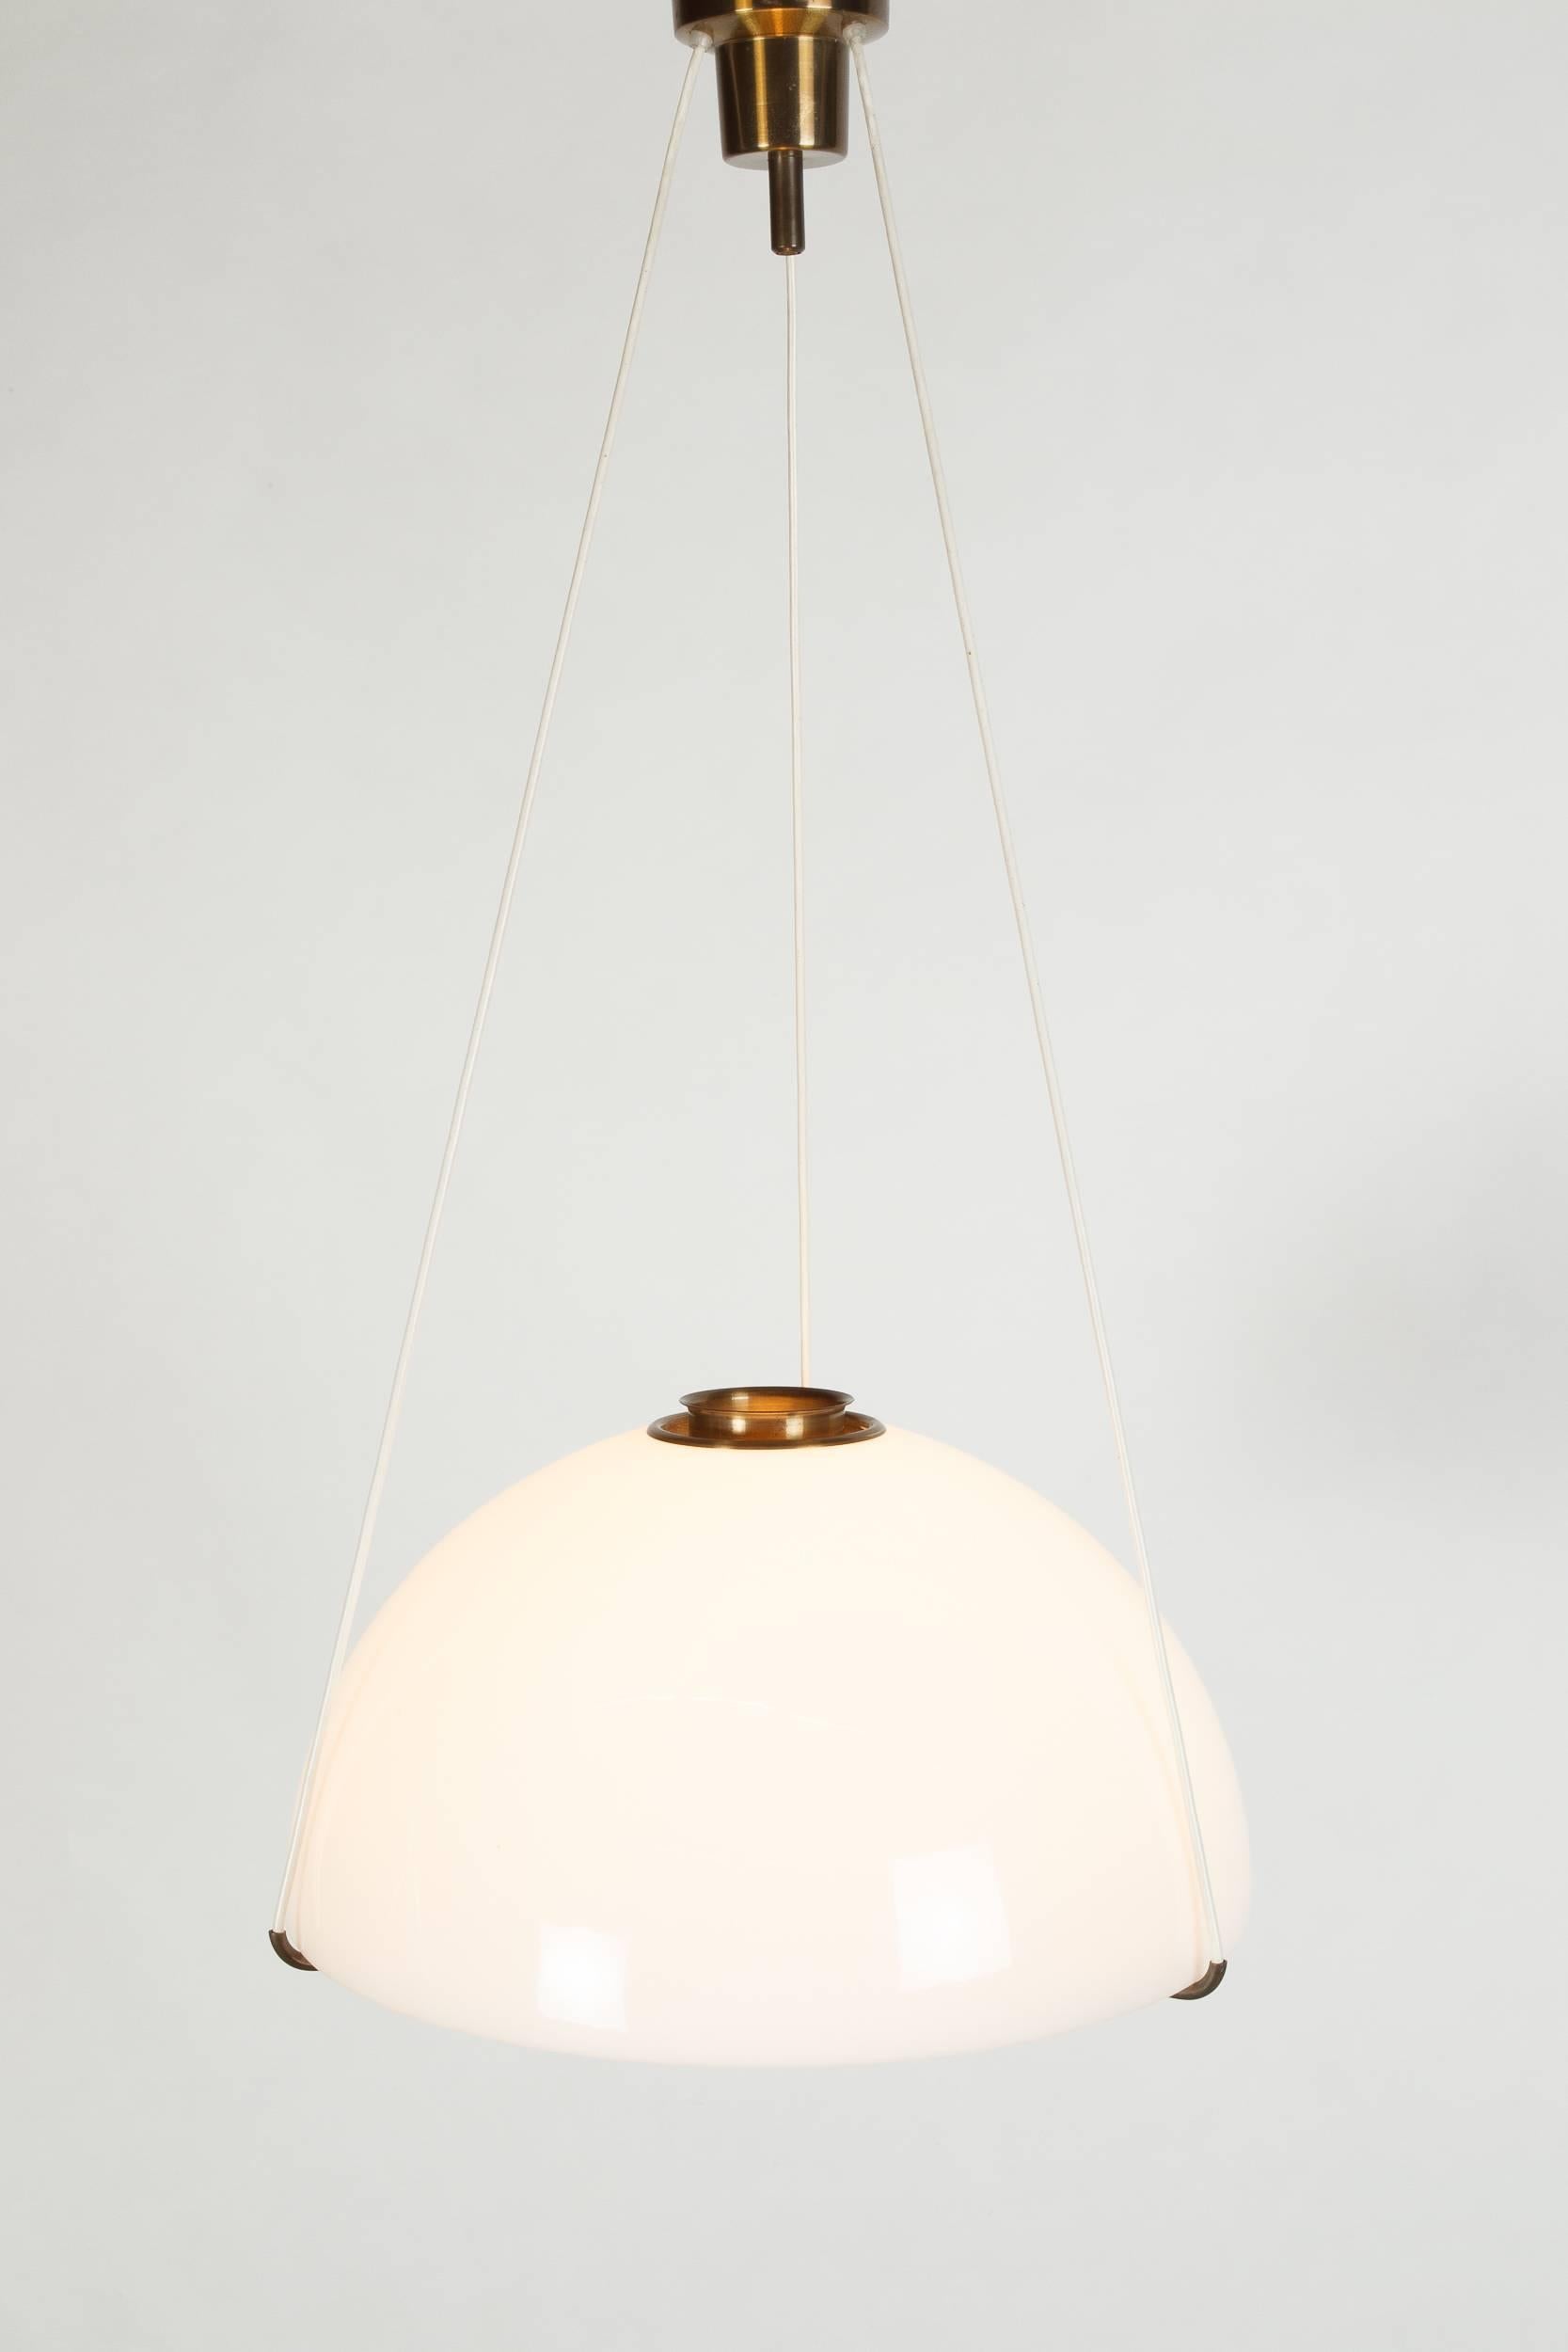 Mid-Century Modern Swedish Pendant by Anders Pehrson for Ateljé Lyktan, 1970s